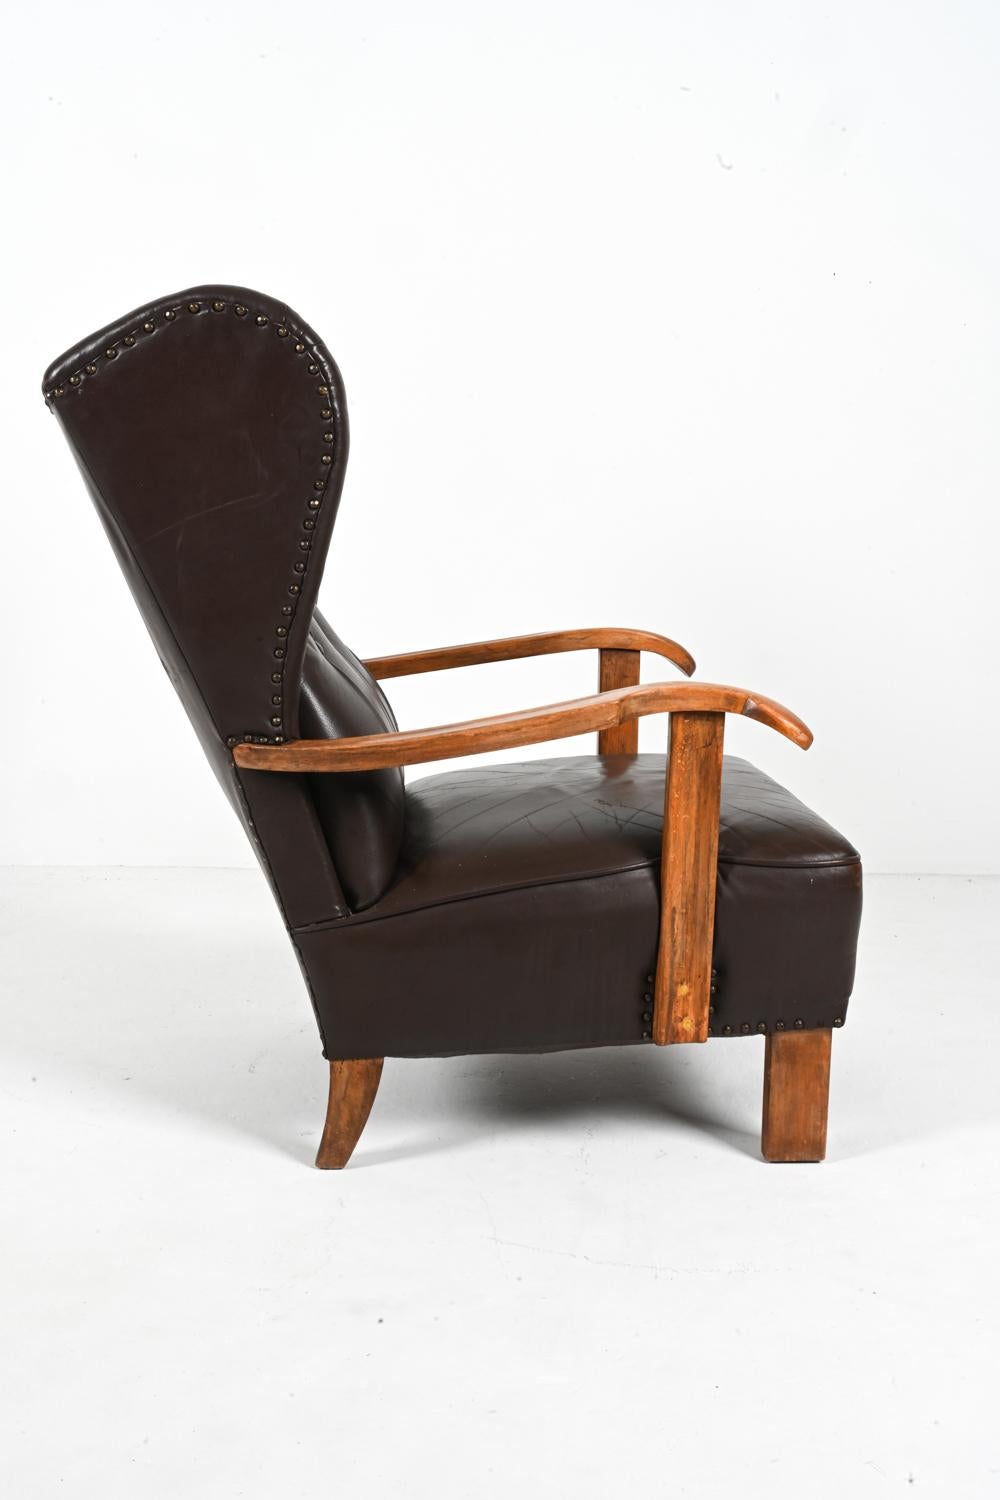 Fritz Hansen Model 1582 Wingback Lounge Chair in Beech & Leather, c. 1940's For Sale 8